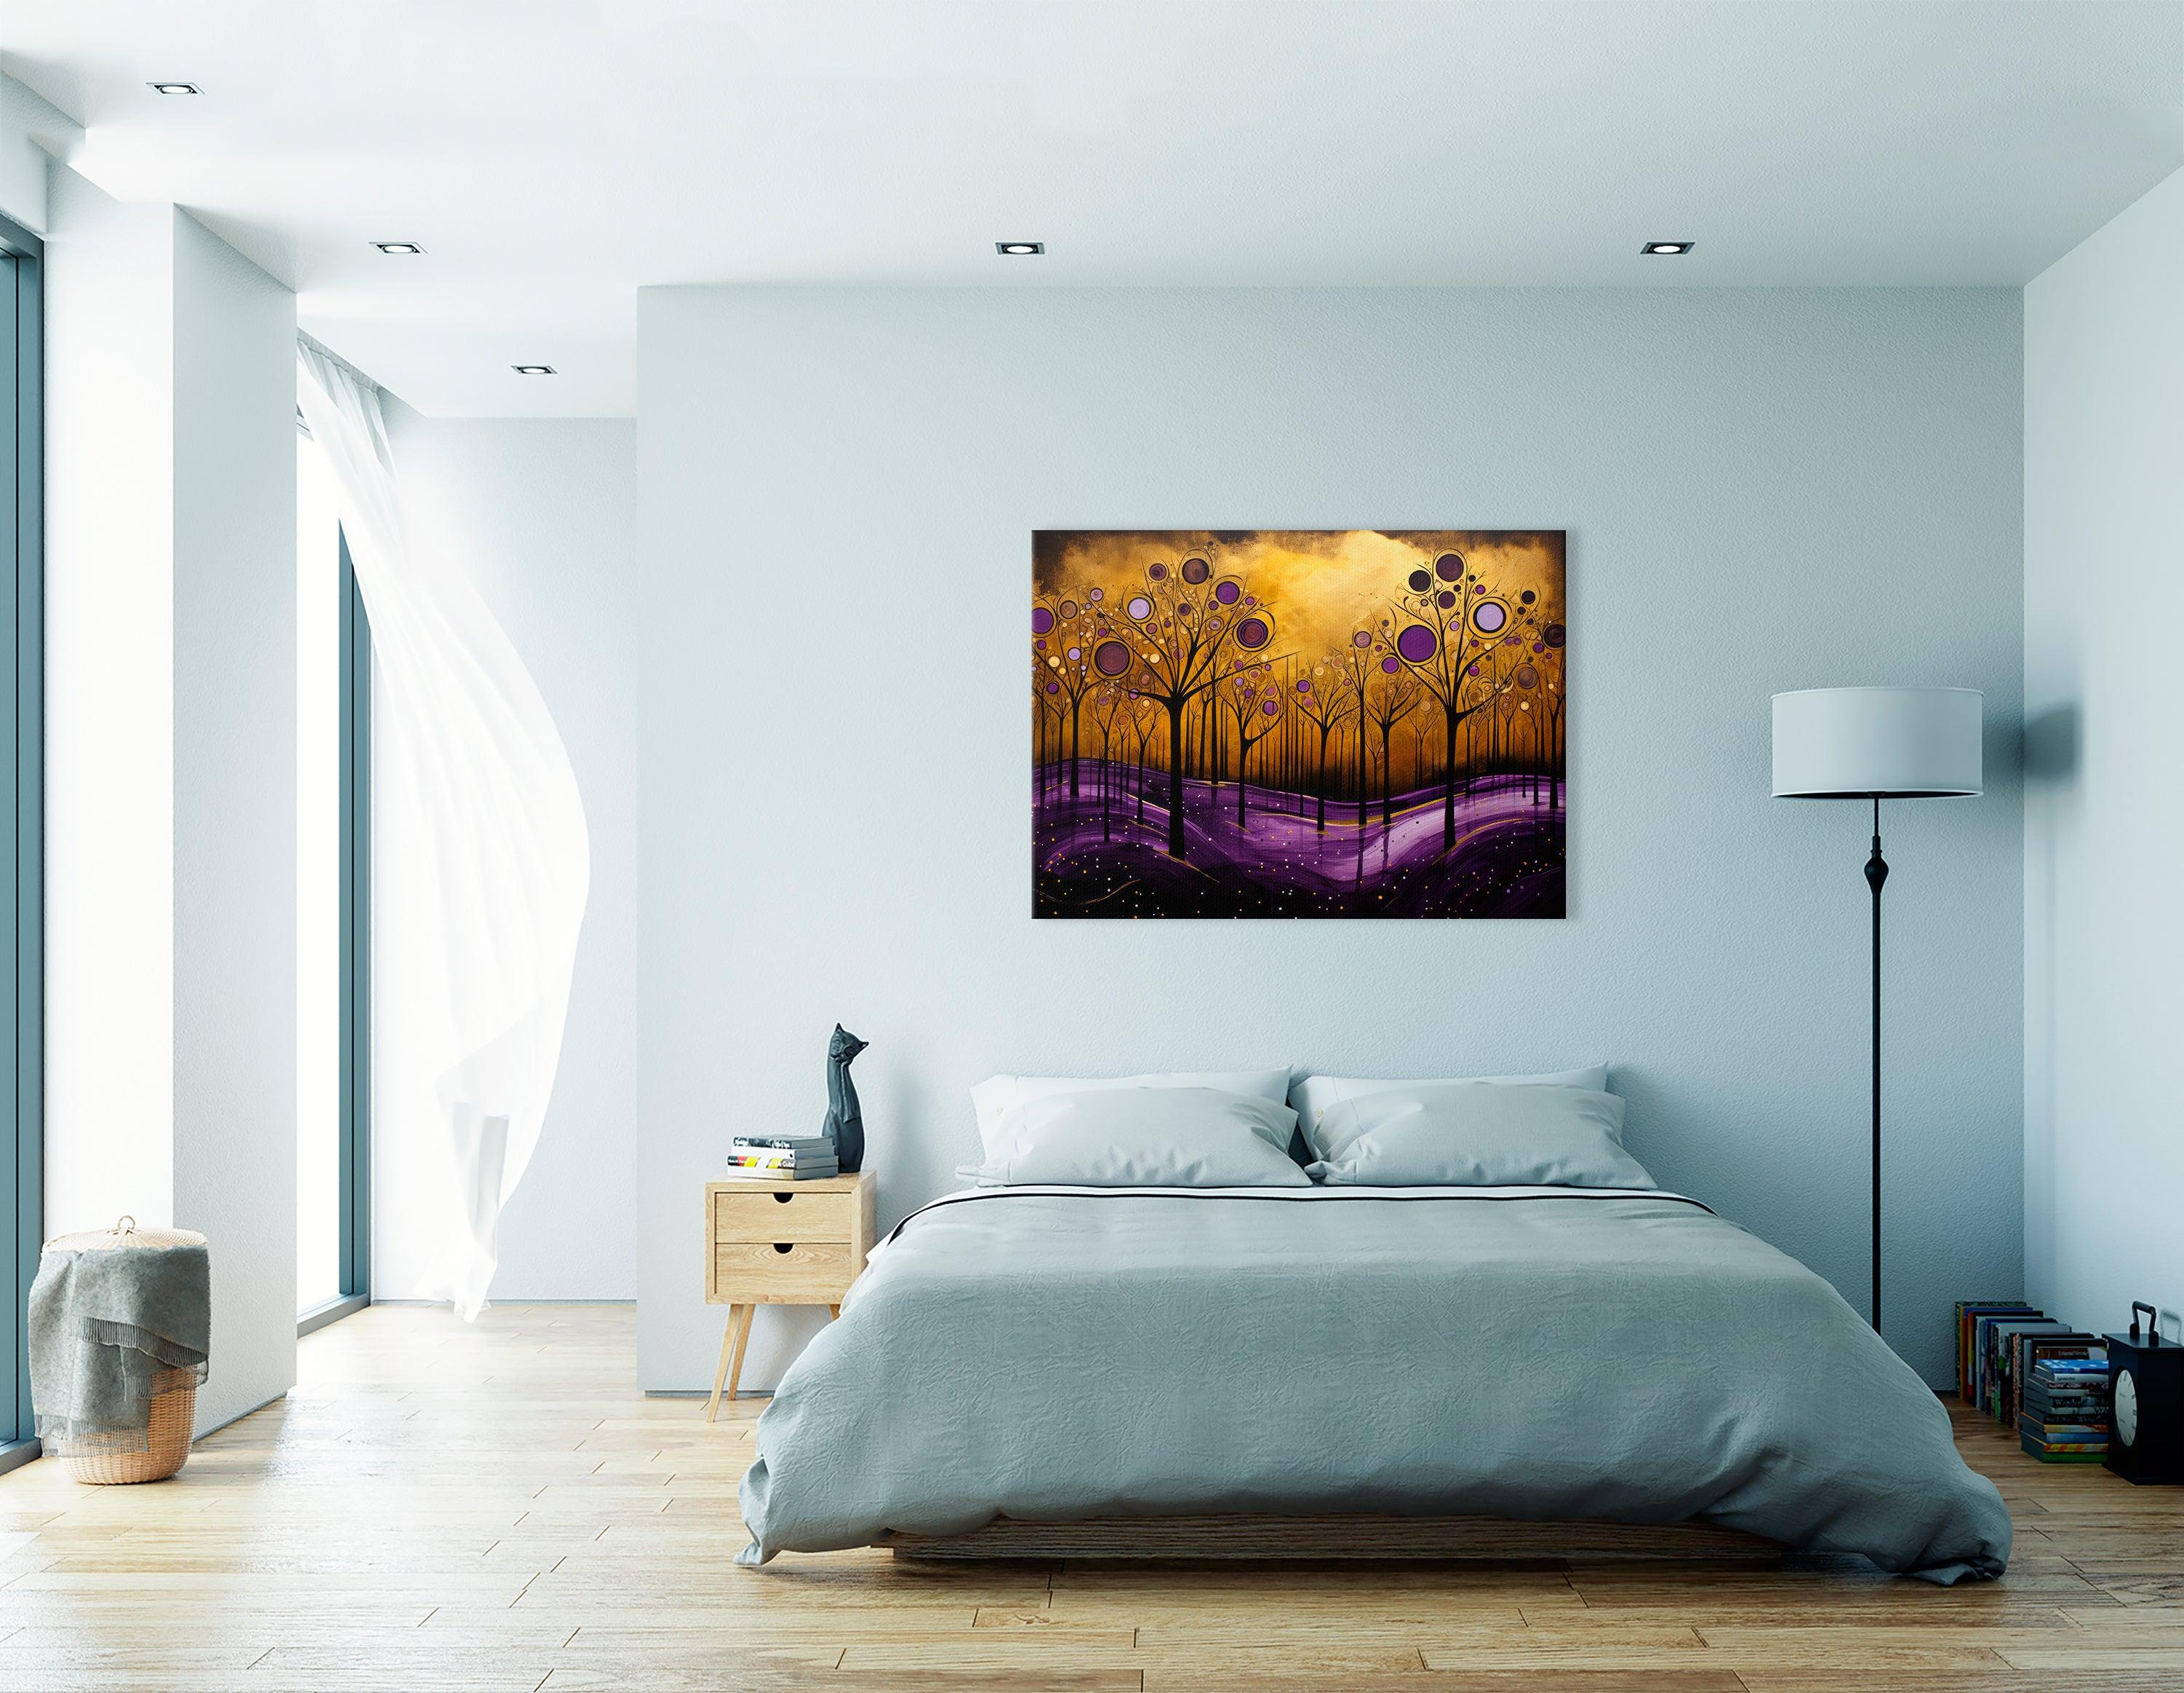 Gold and Purple Abstract Canvas Print with Trees - Artoholica Ready to Hang Canvas Print